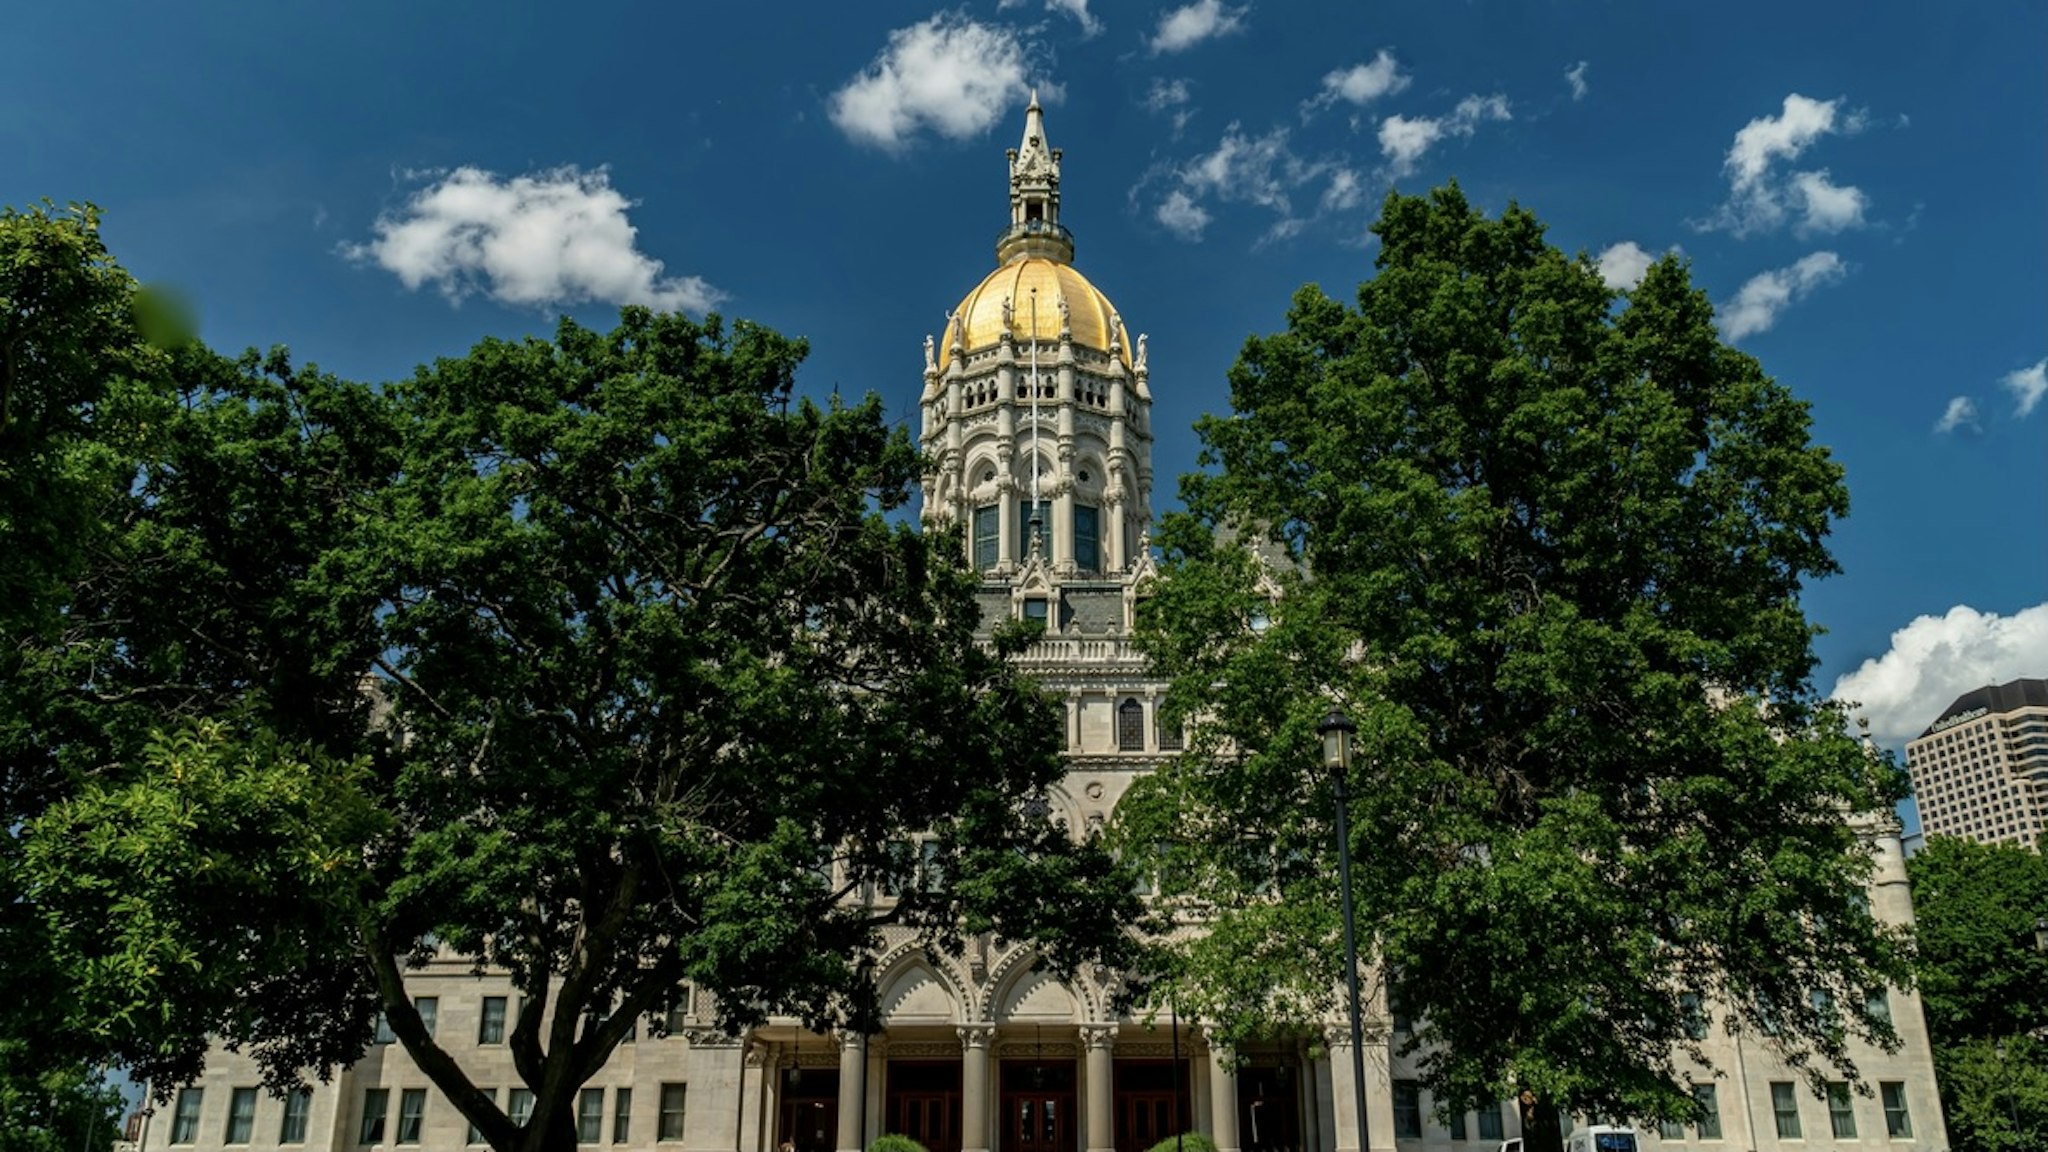 Connecticut State House - stock photo Connecticut State Capitol Building - Hartford, CT ReDunnLev via Getty Images